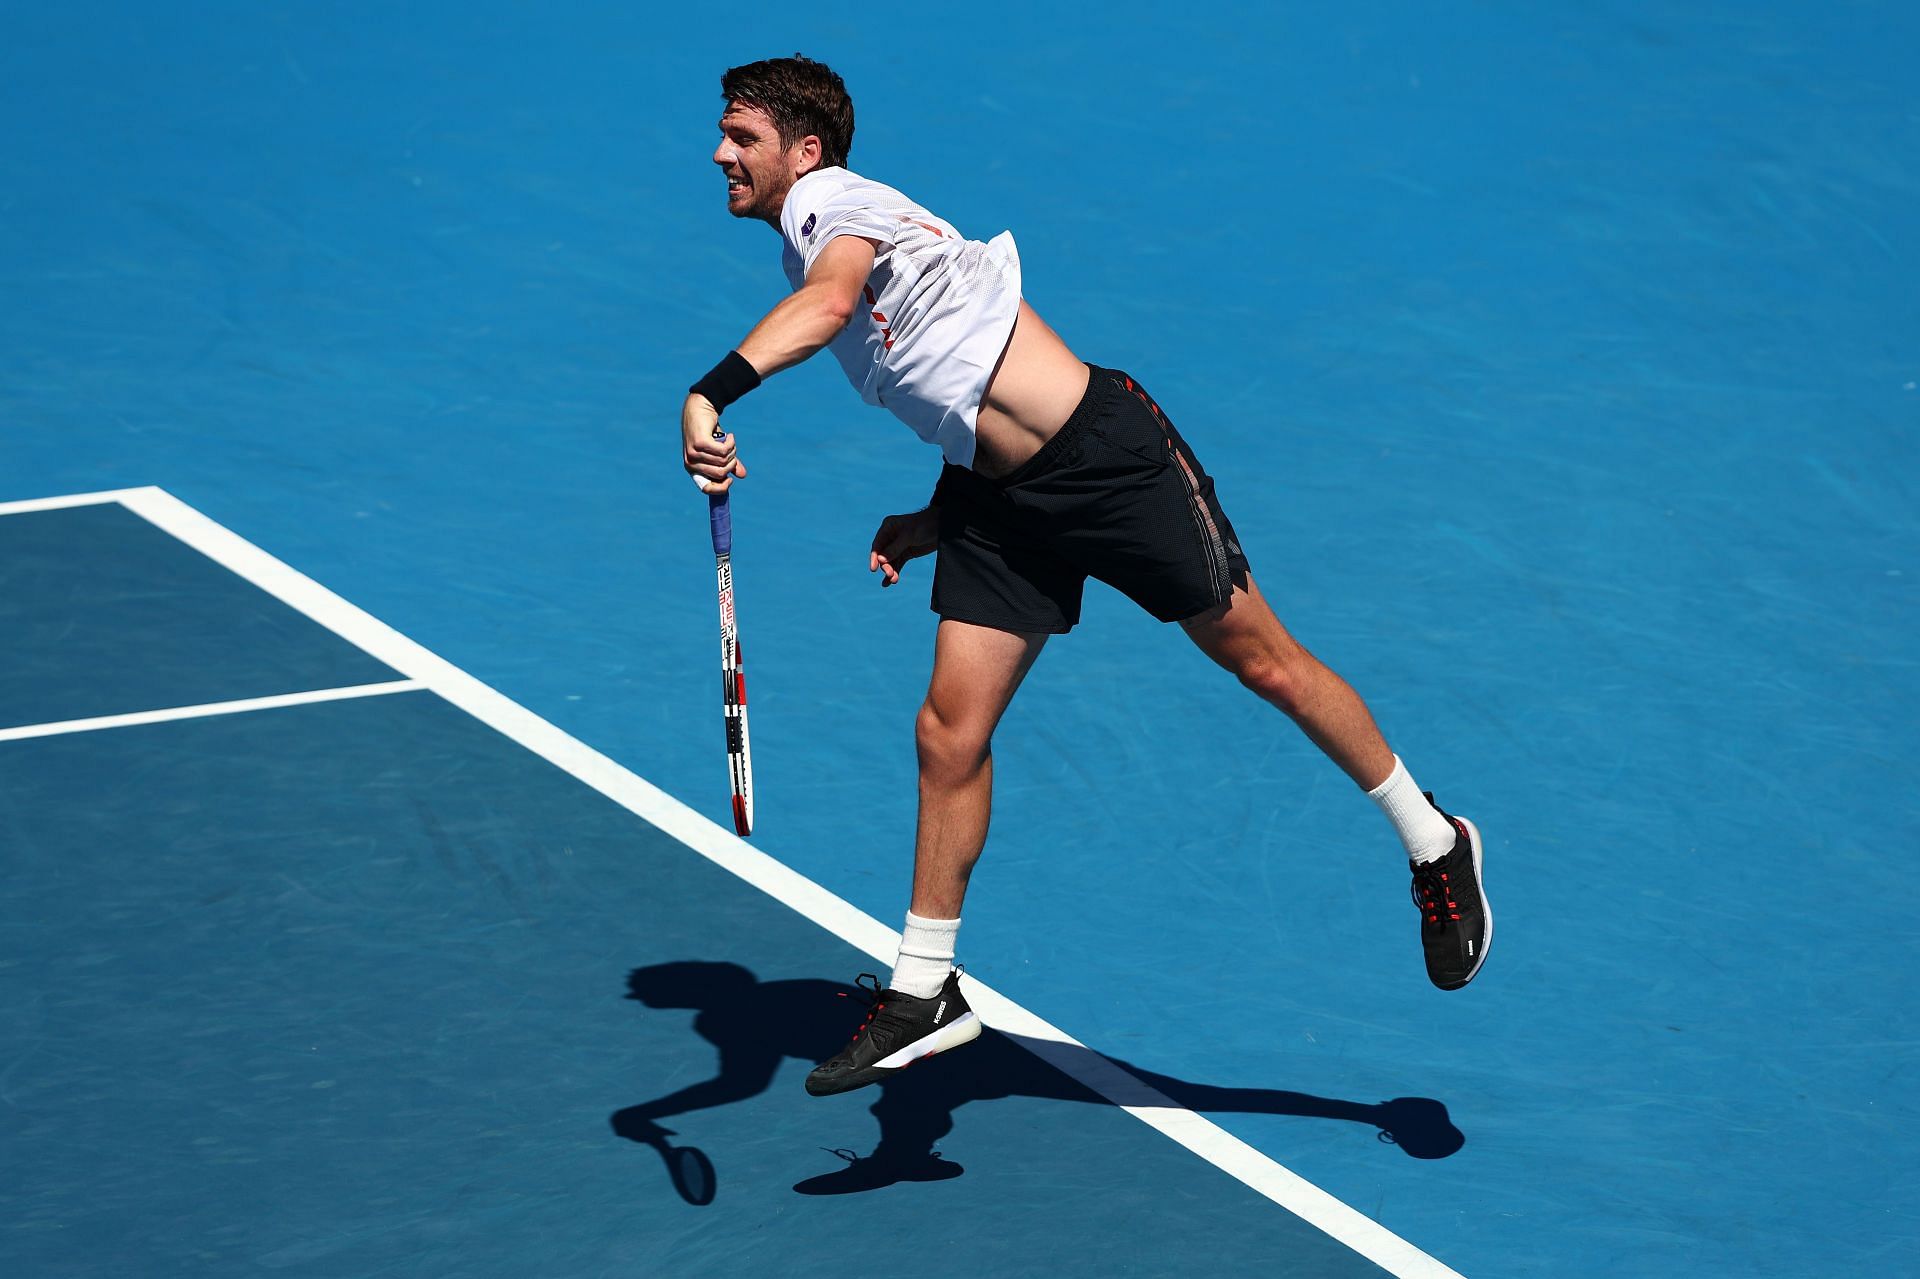 Cameron Norrie at the 2022 Australian Open.